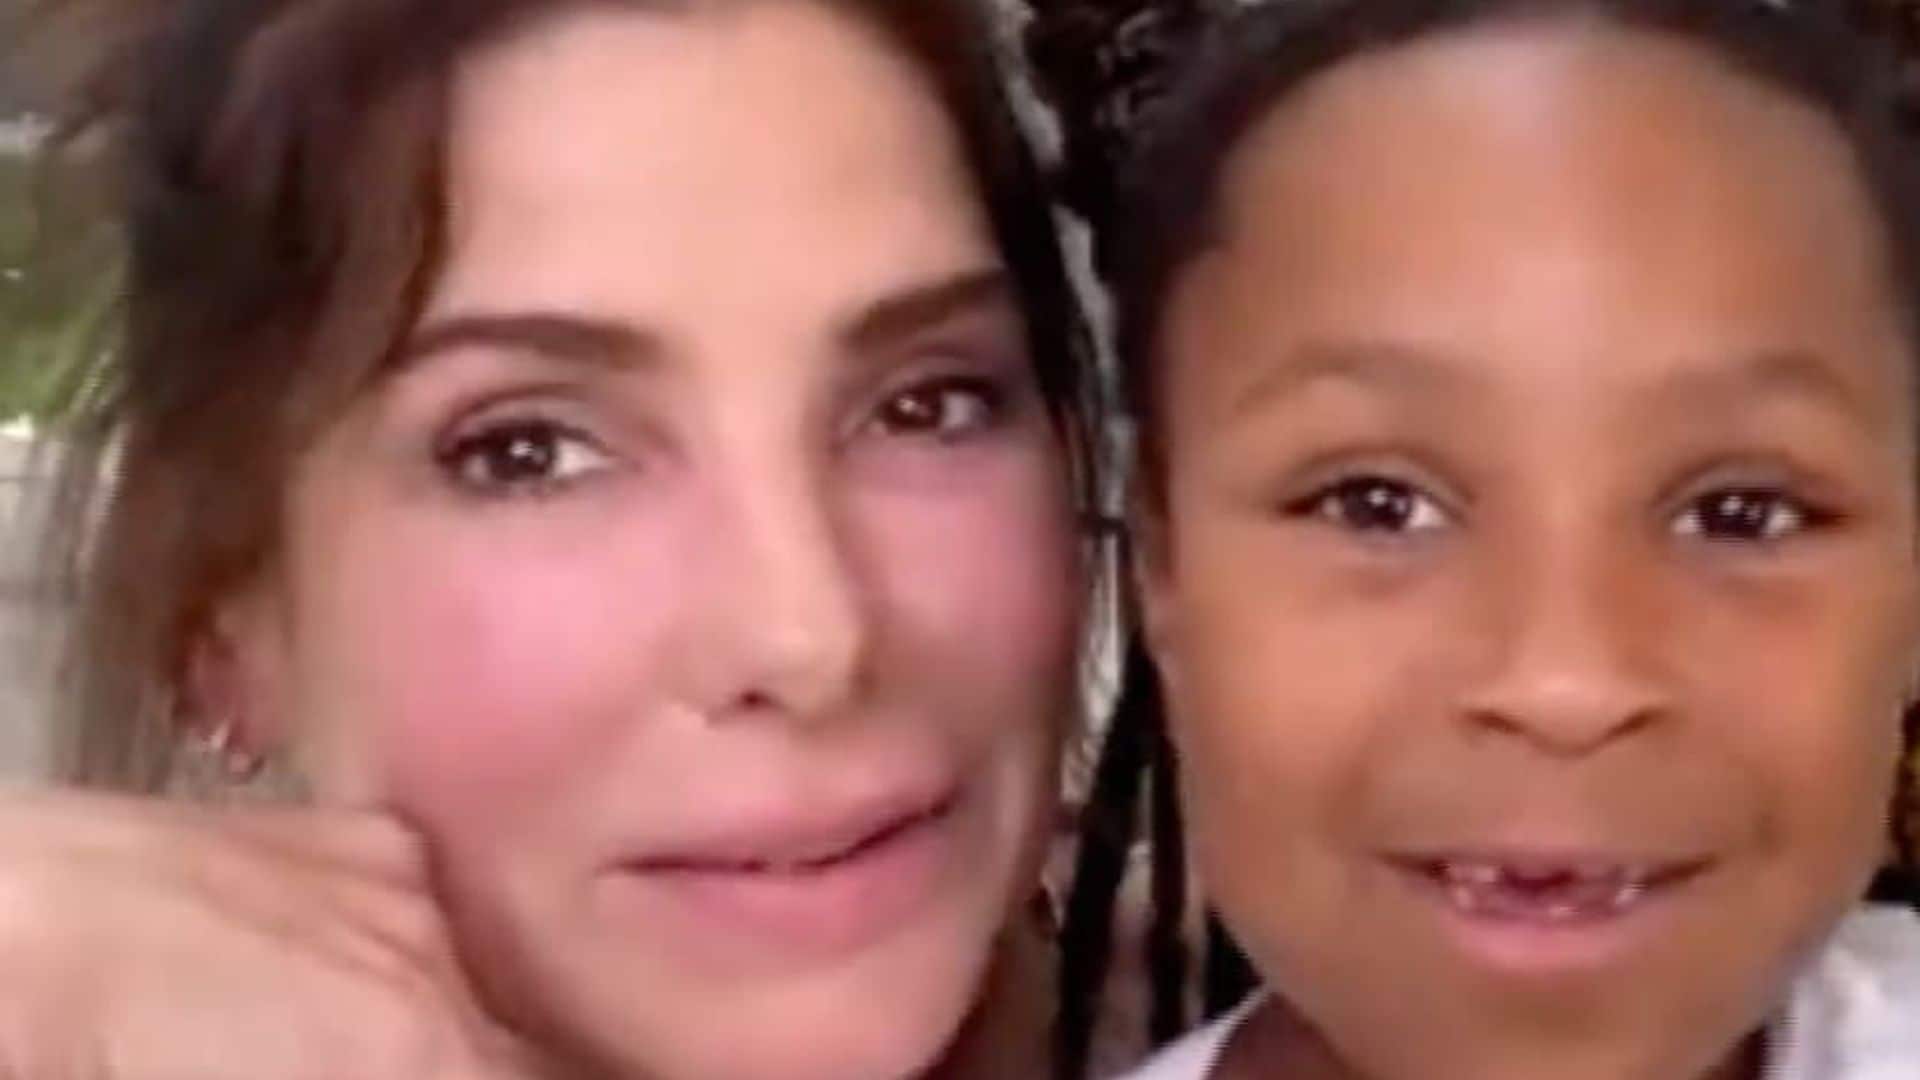 Sandra Bullock’s rarely-seen daughter Laila makes public appearance to help mom with something special